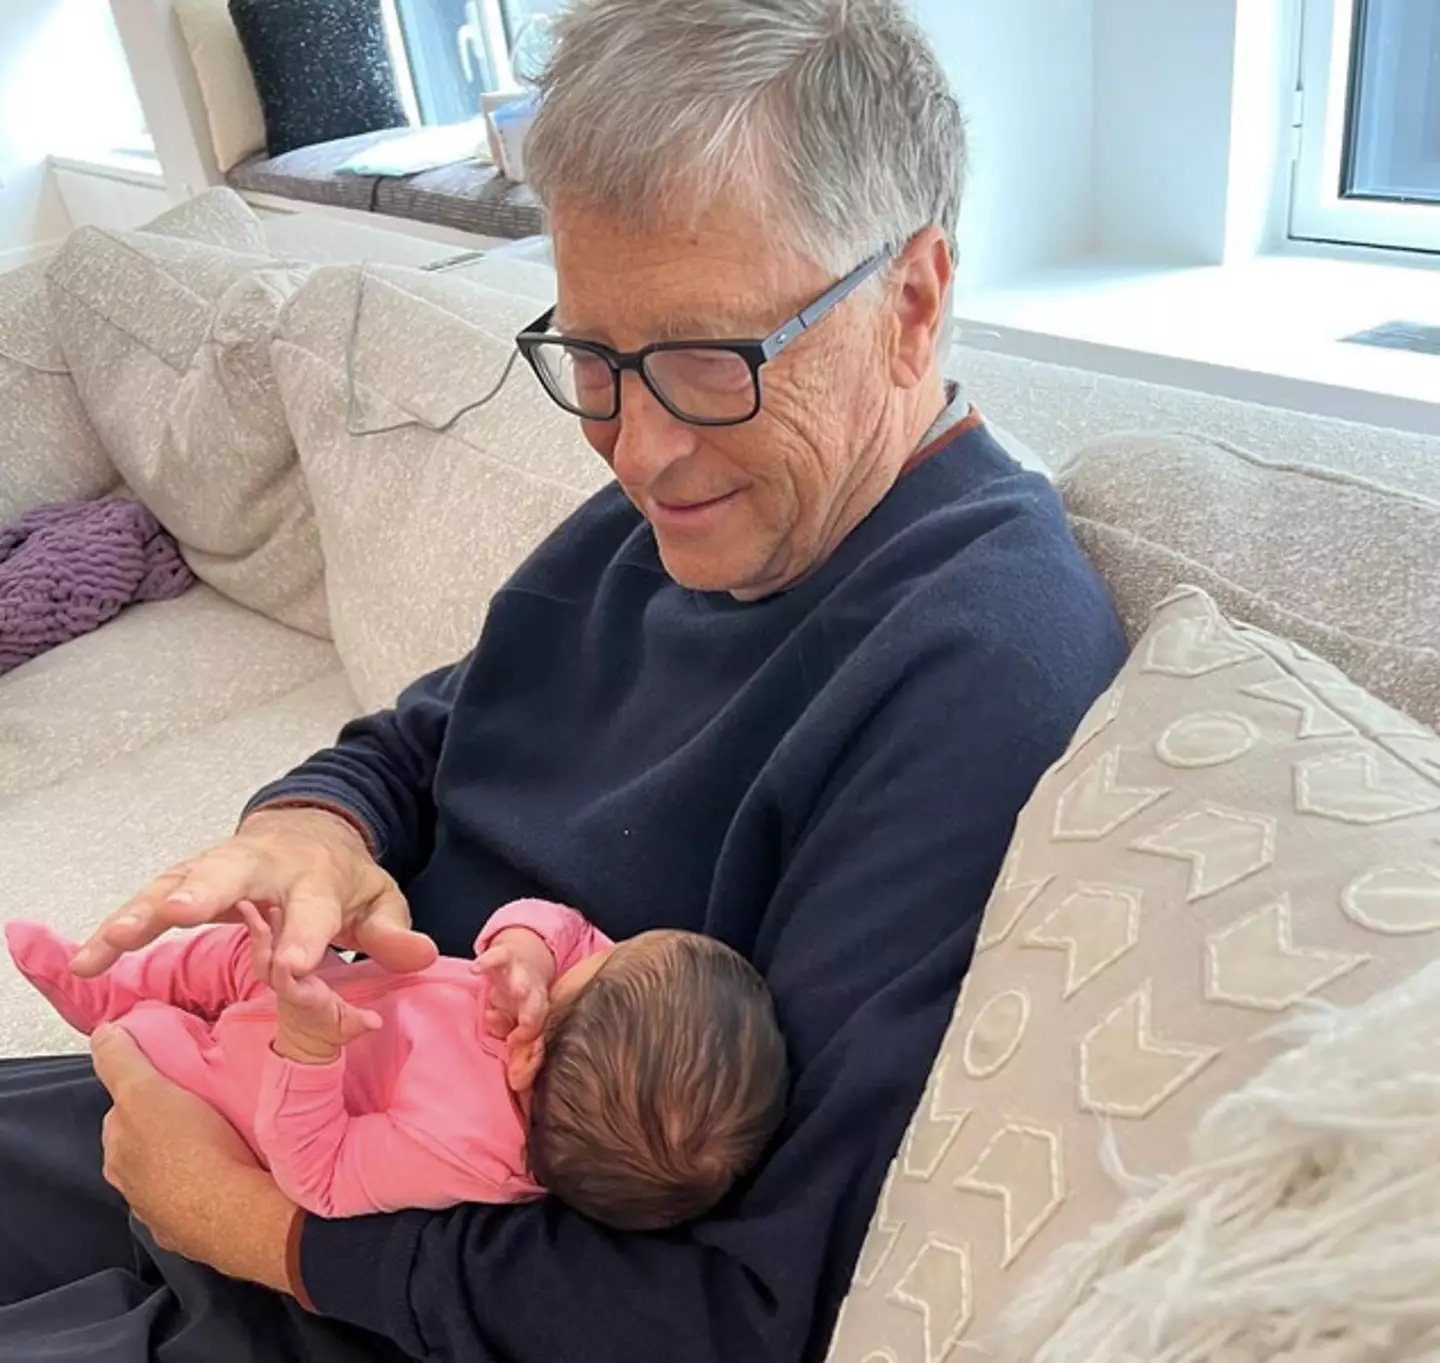 Gates welcomed a grandchild earlier this year.